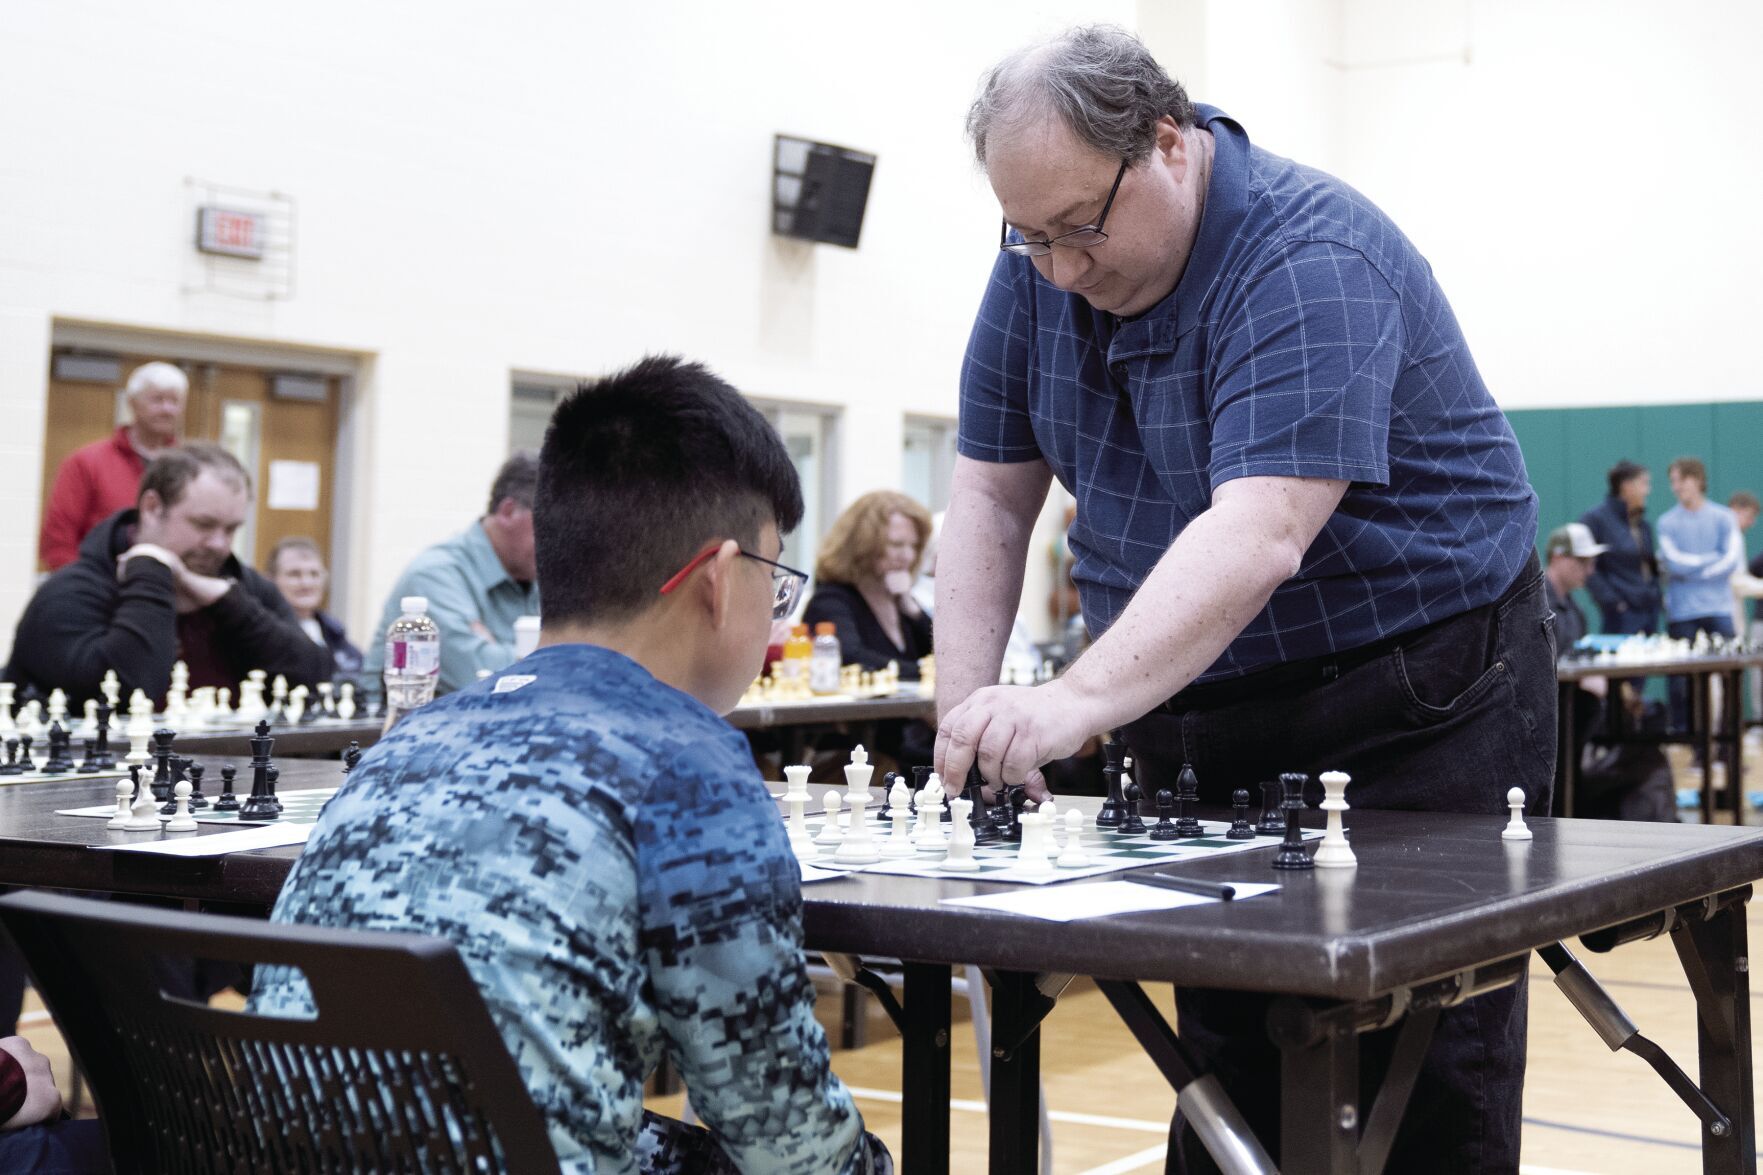 Chess Grandmaster plays 25 amateurs simultaneously ahead of inaugural Sheridan Wyoming Open Chess Tournament Wyoming gillettenewsrecord